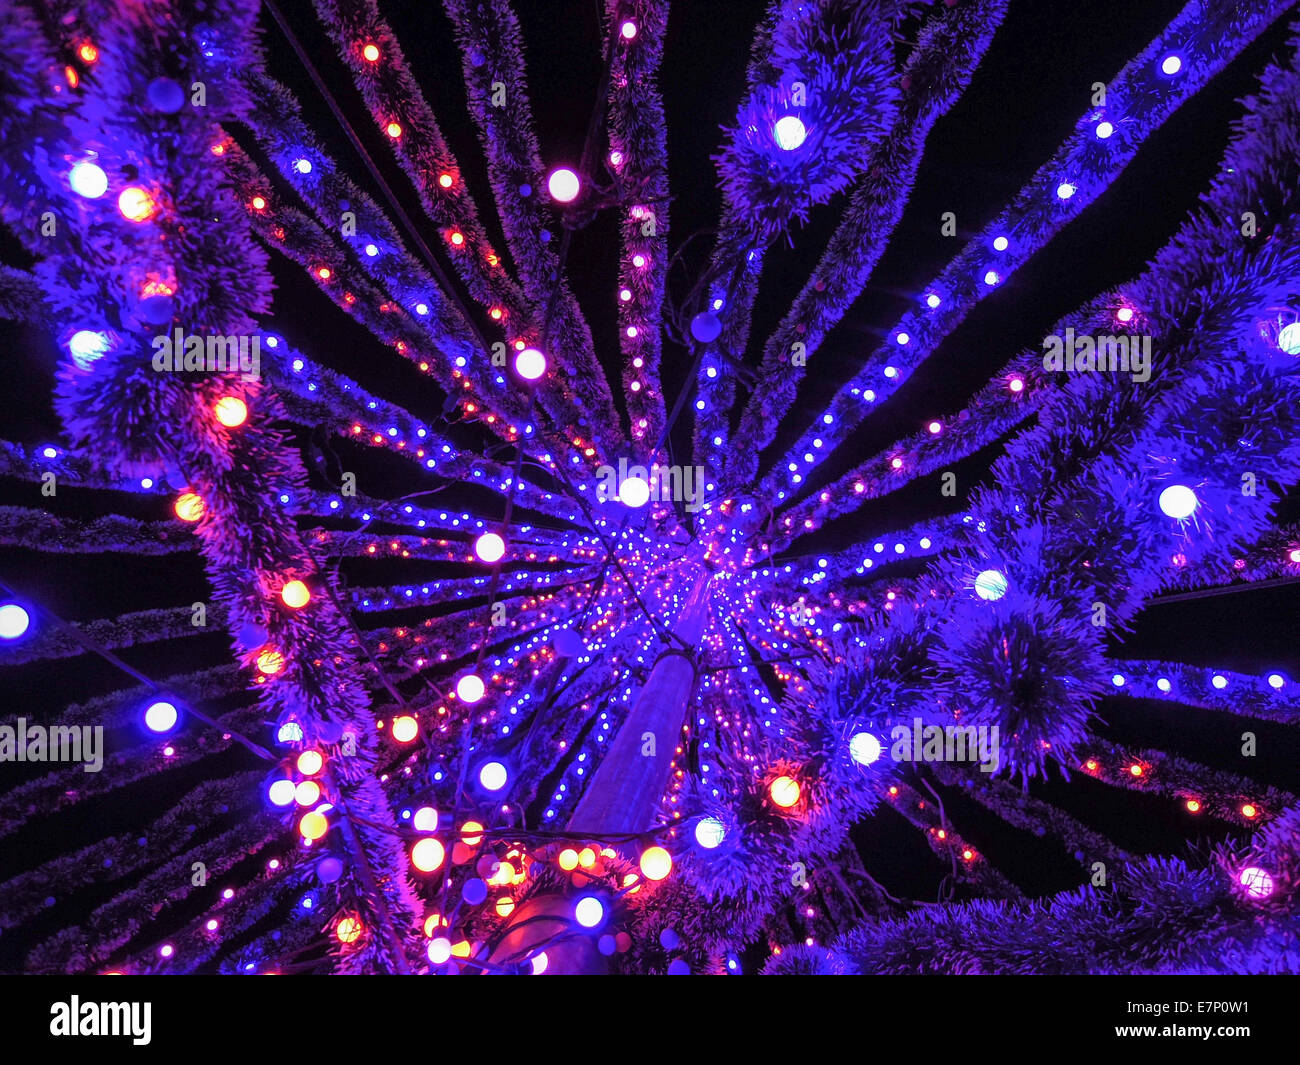 background, lights, night, psychedelic, red, strings, texture, violet, concepts Stock Photo